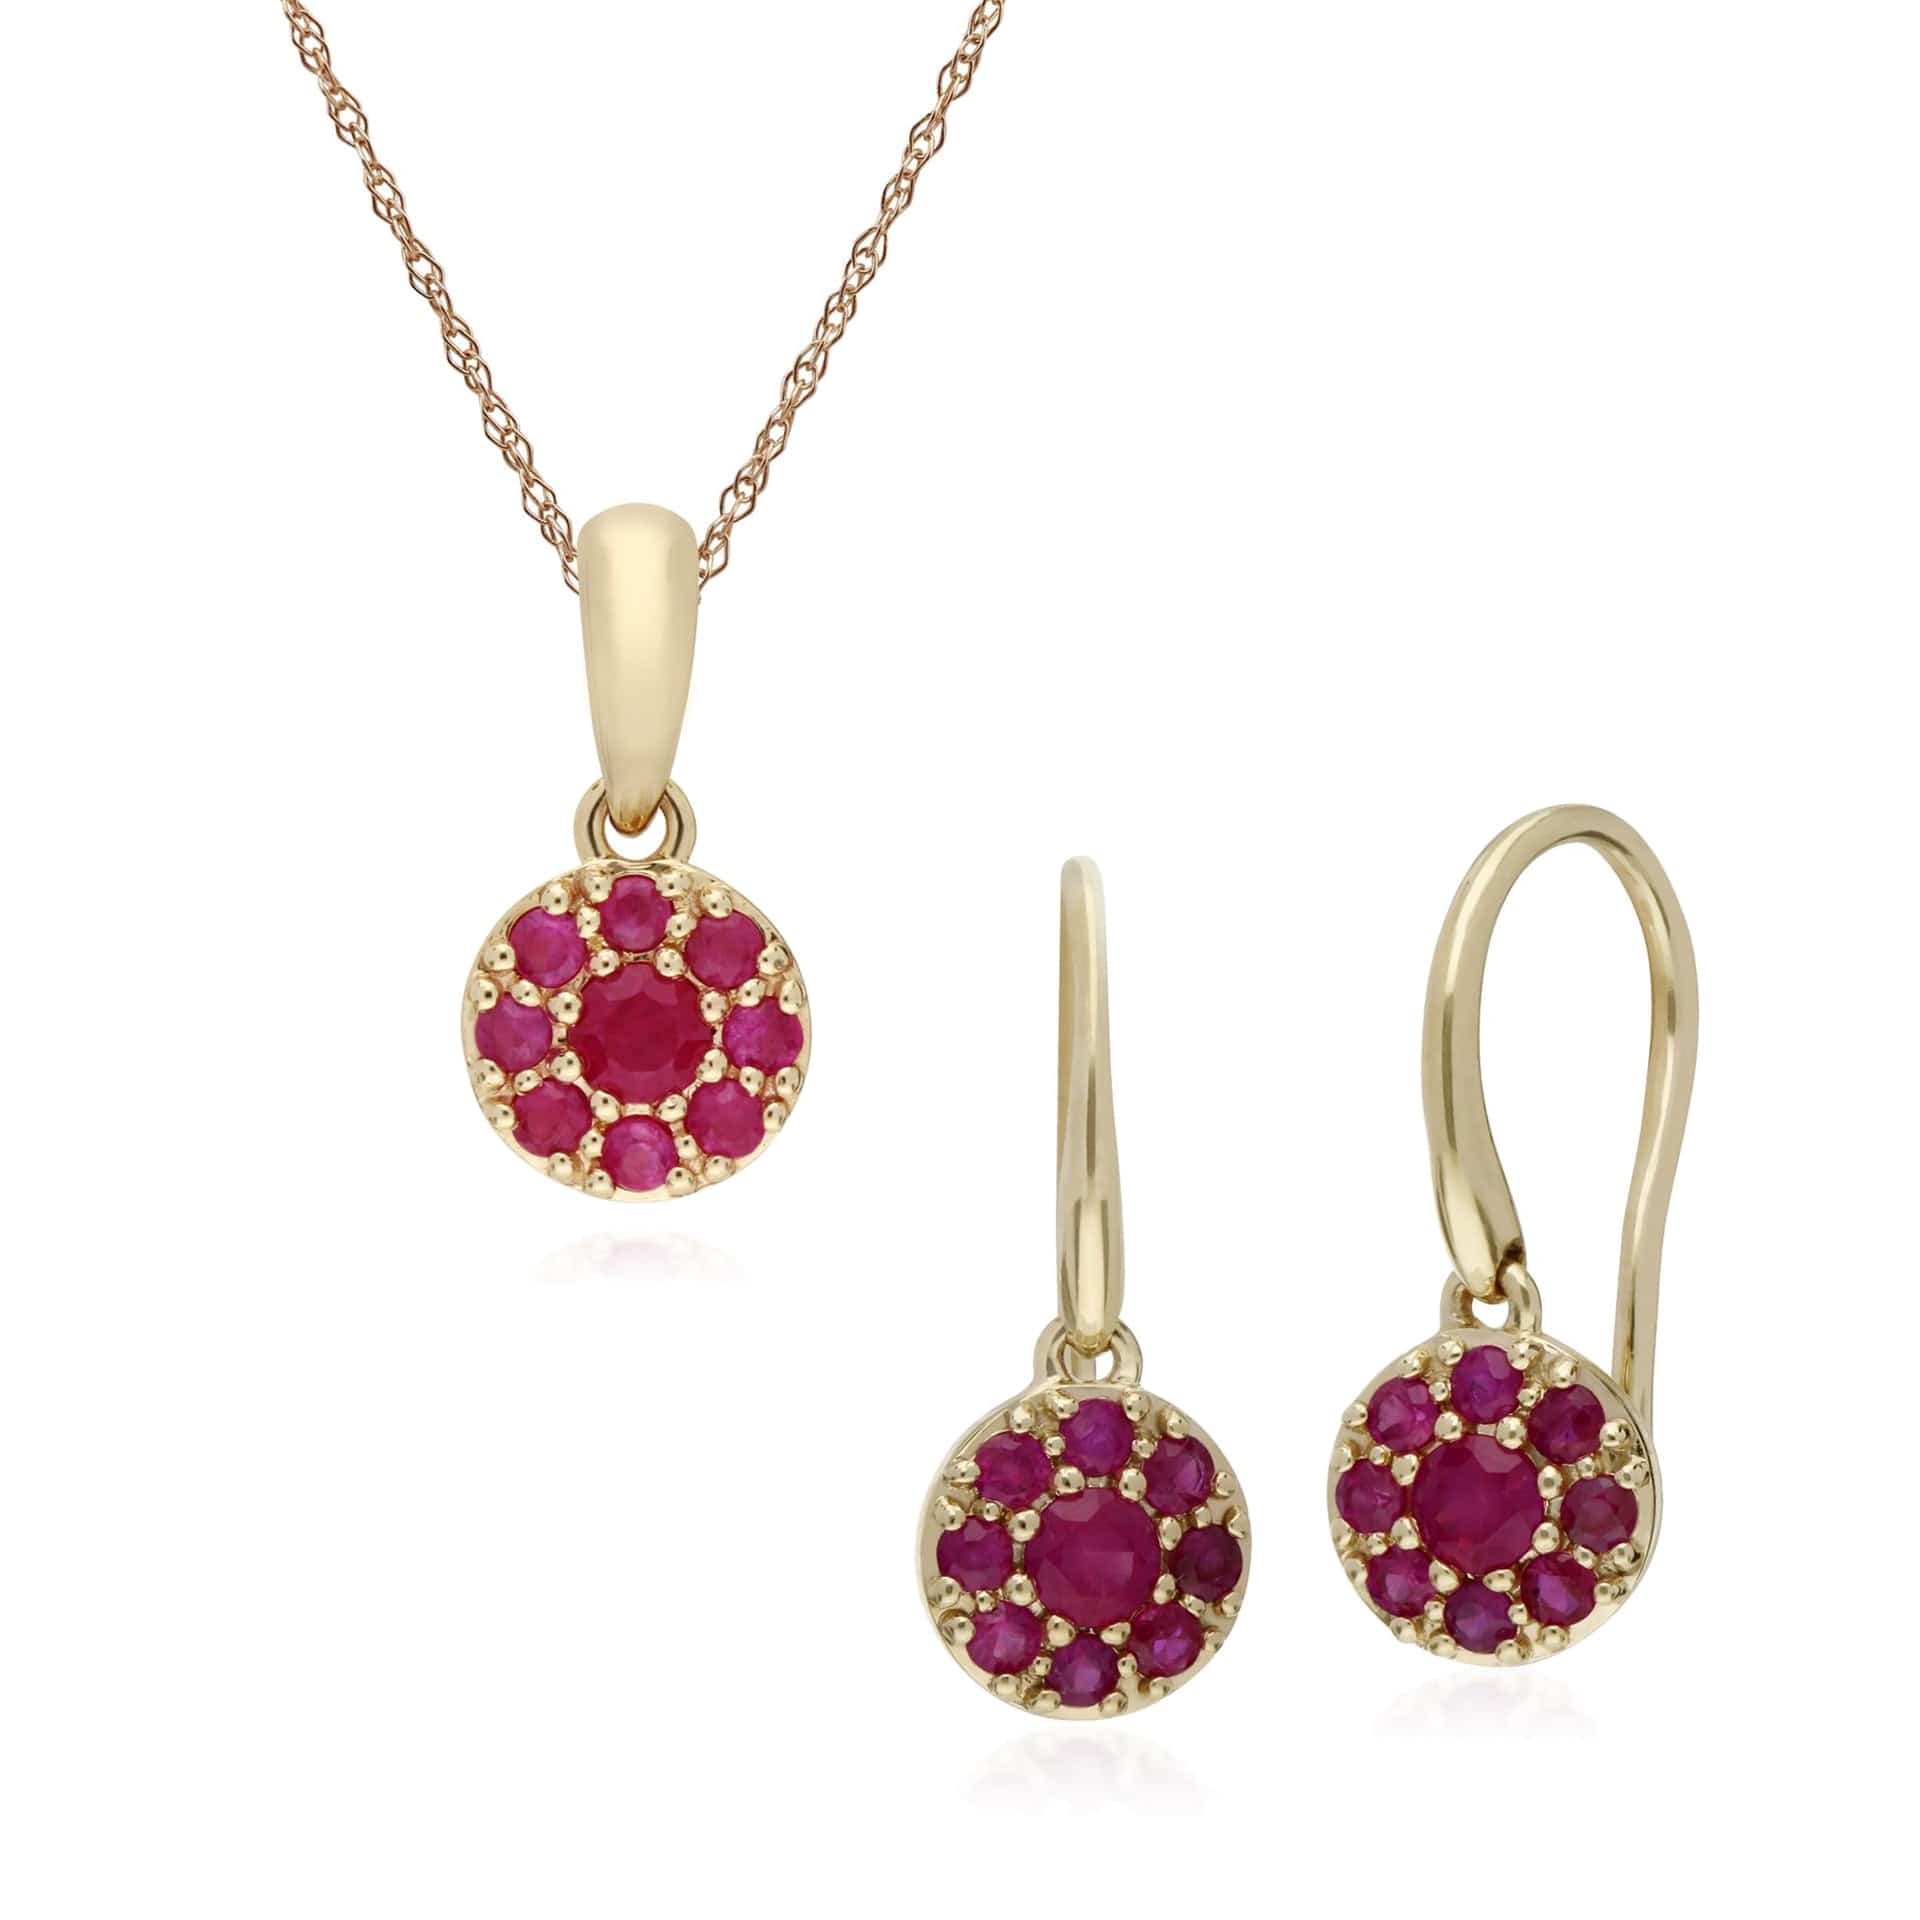 135E1573019-135P1910019 Classic Round Ruby Cluster Drop Earrings & Pendant Set in 9ct Yellow Gold 1